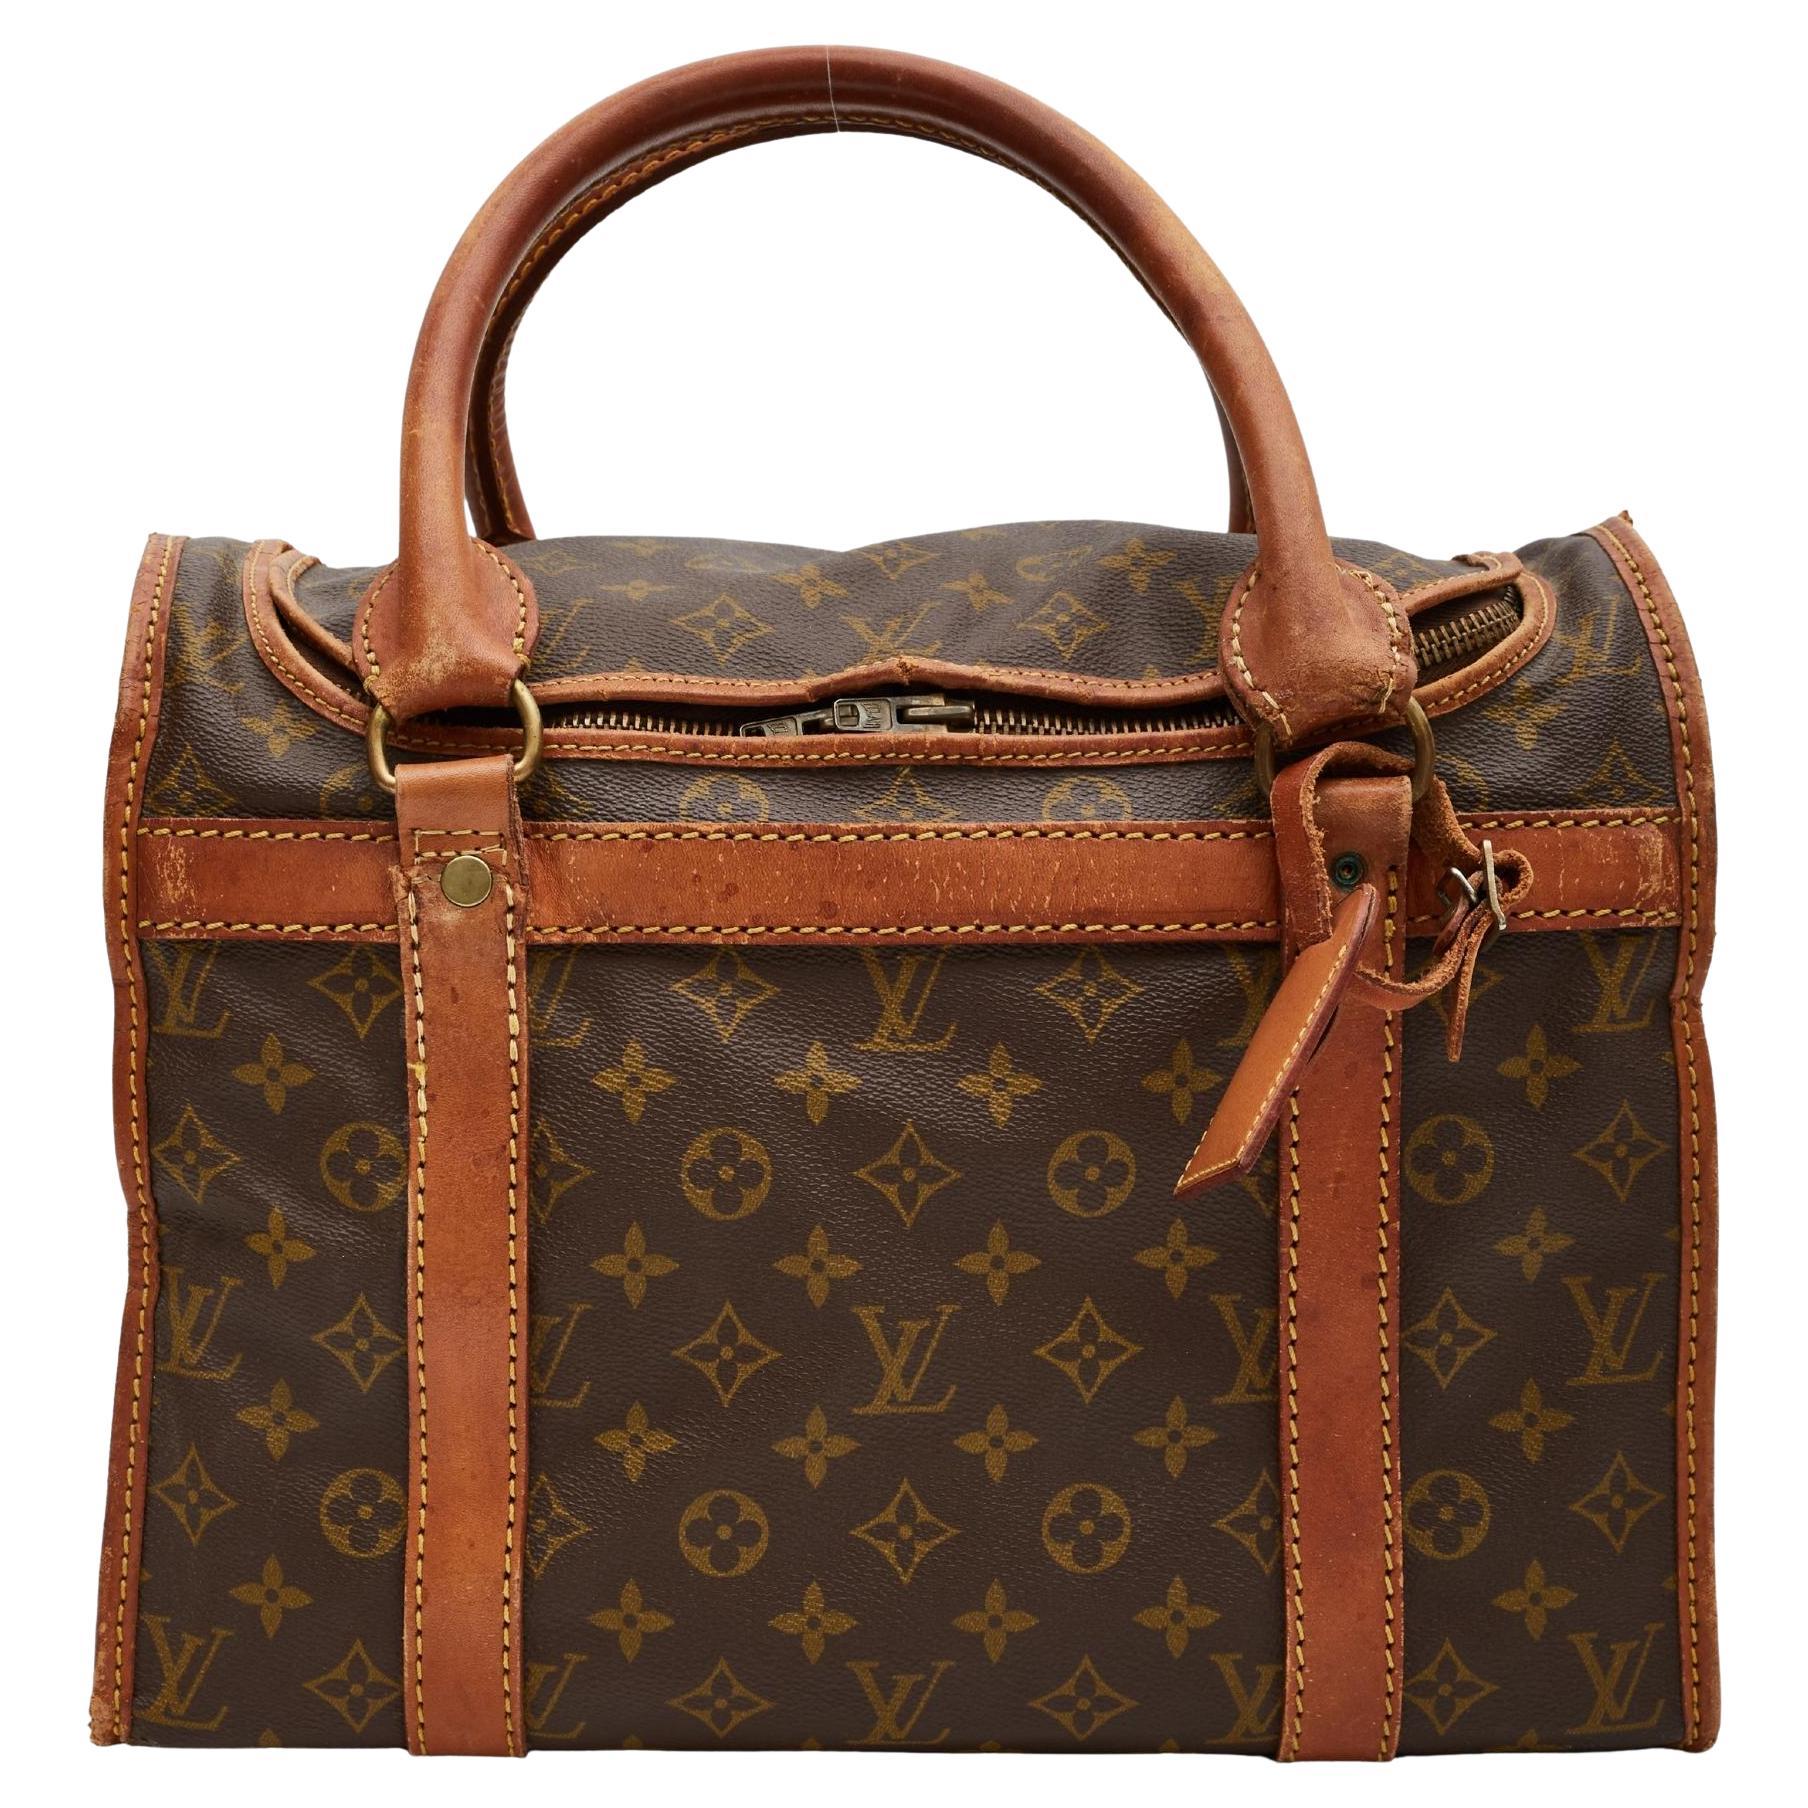 Louis Vuitton Pet Carrier - 10 For Sale on 1stDibs